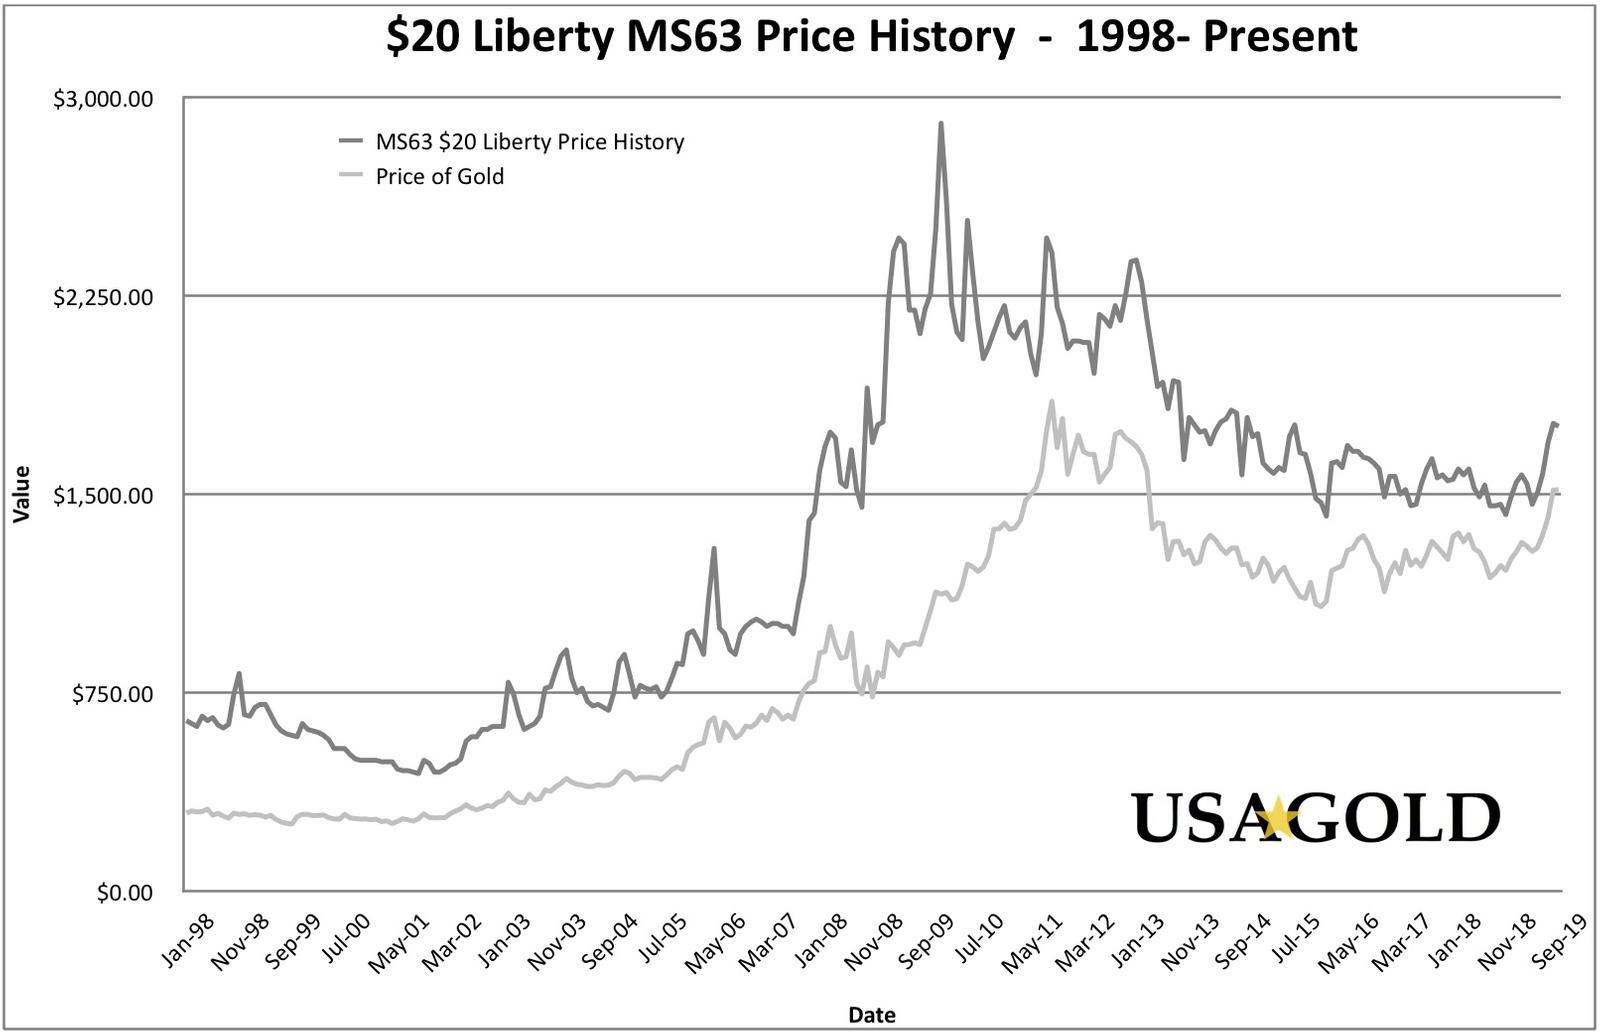 Line chart showing price history of $20 Liberty MS 63